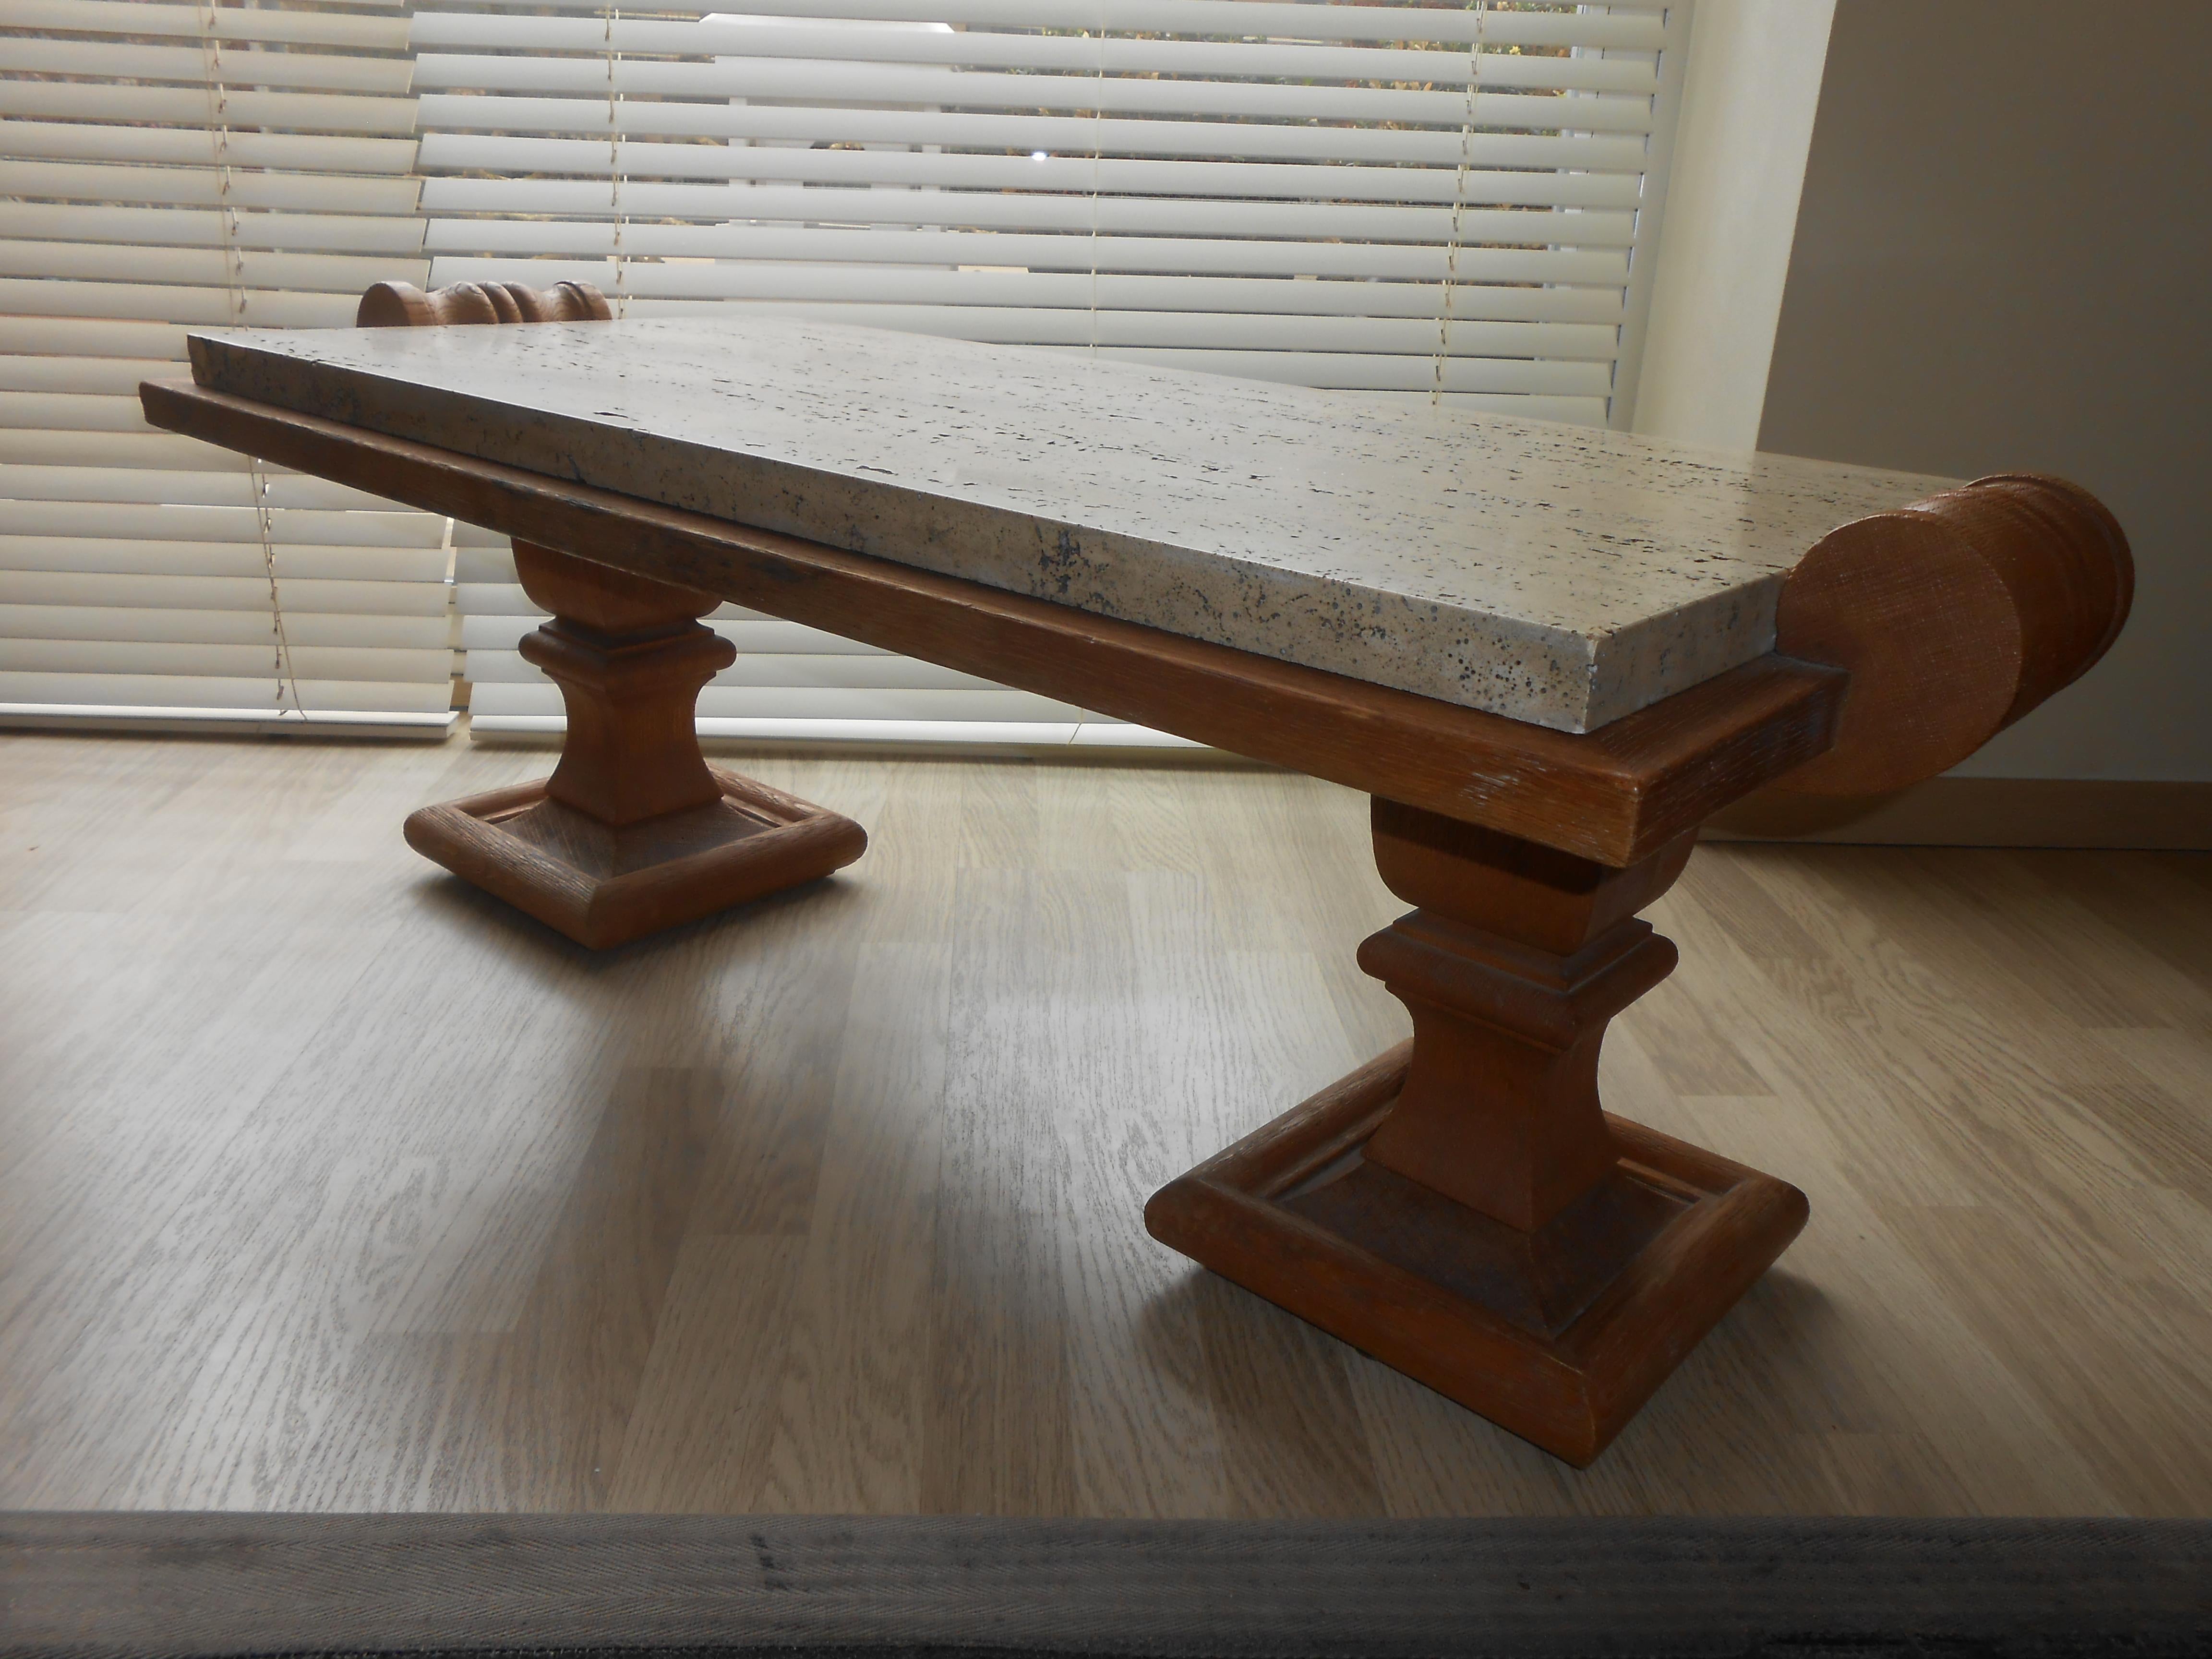 Sandblasted Late 1930s Oak Low Table by Jean-Charles Moreux, France 1938